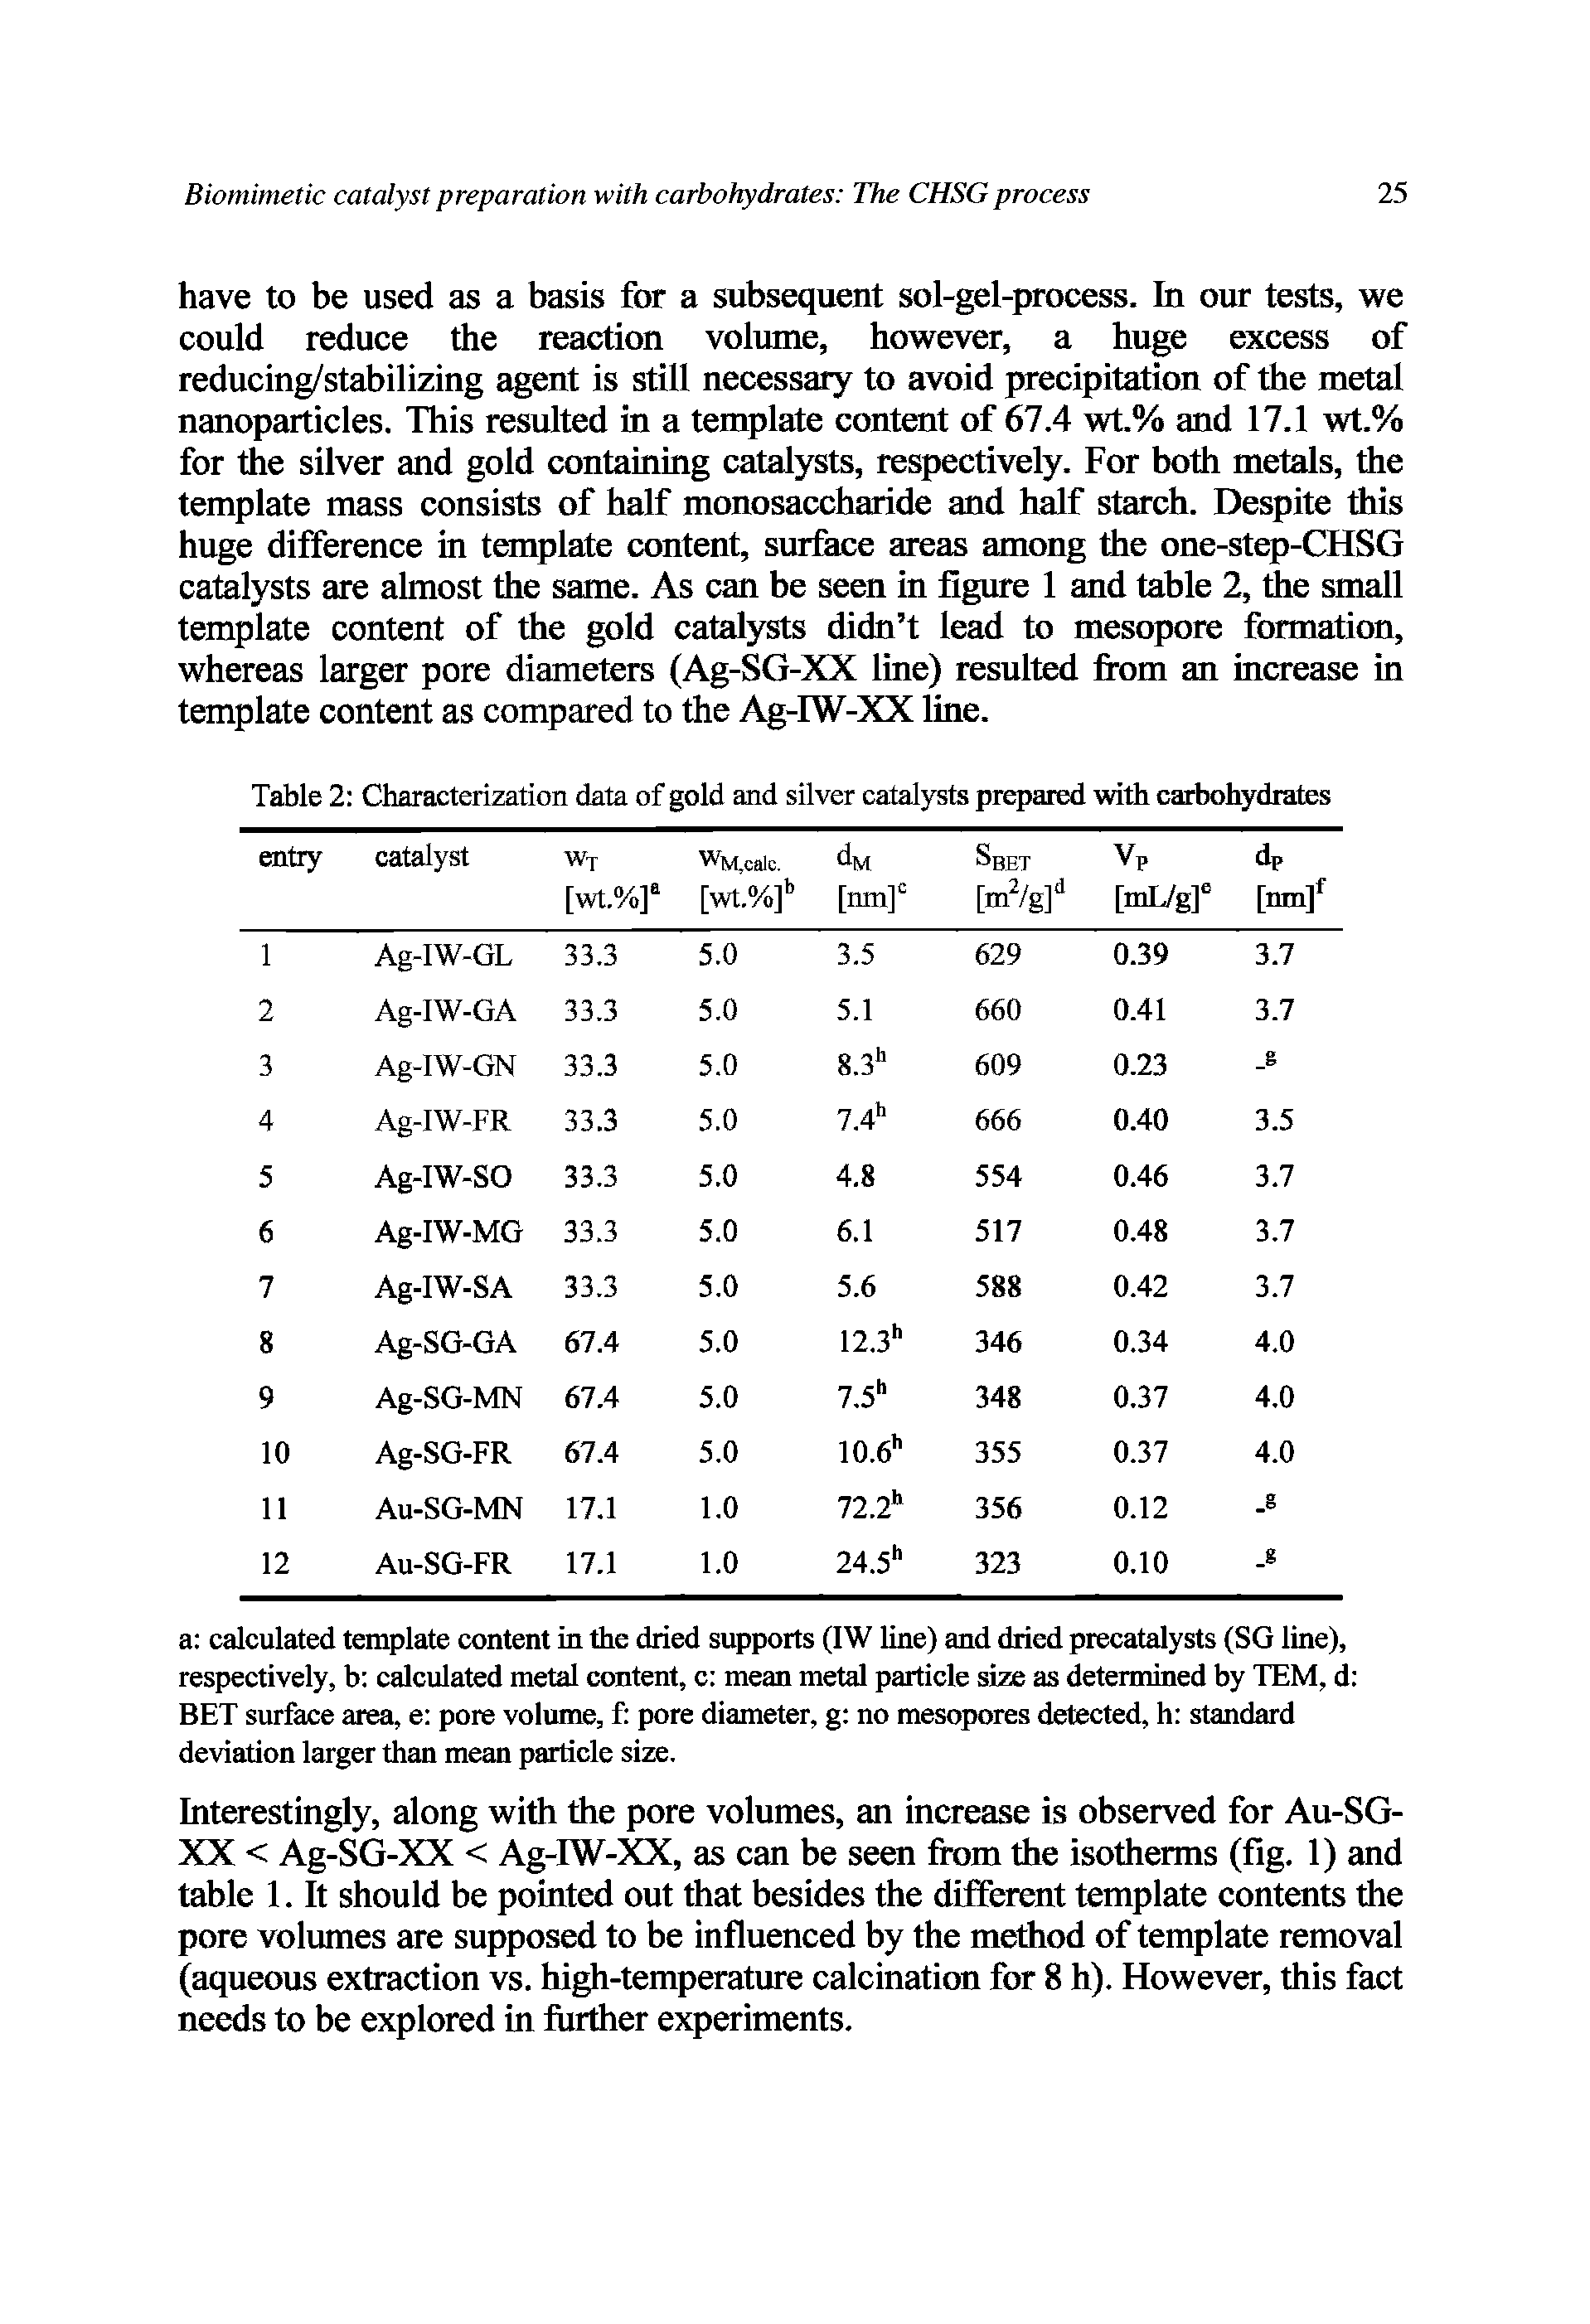 Table 2 Characterization data of gold and silver catalysts prepared with carbohydrates...